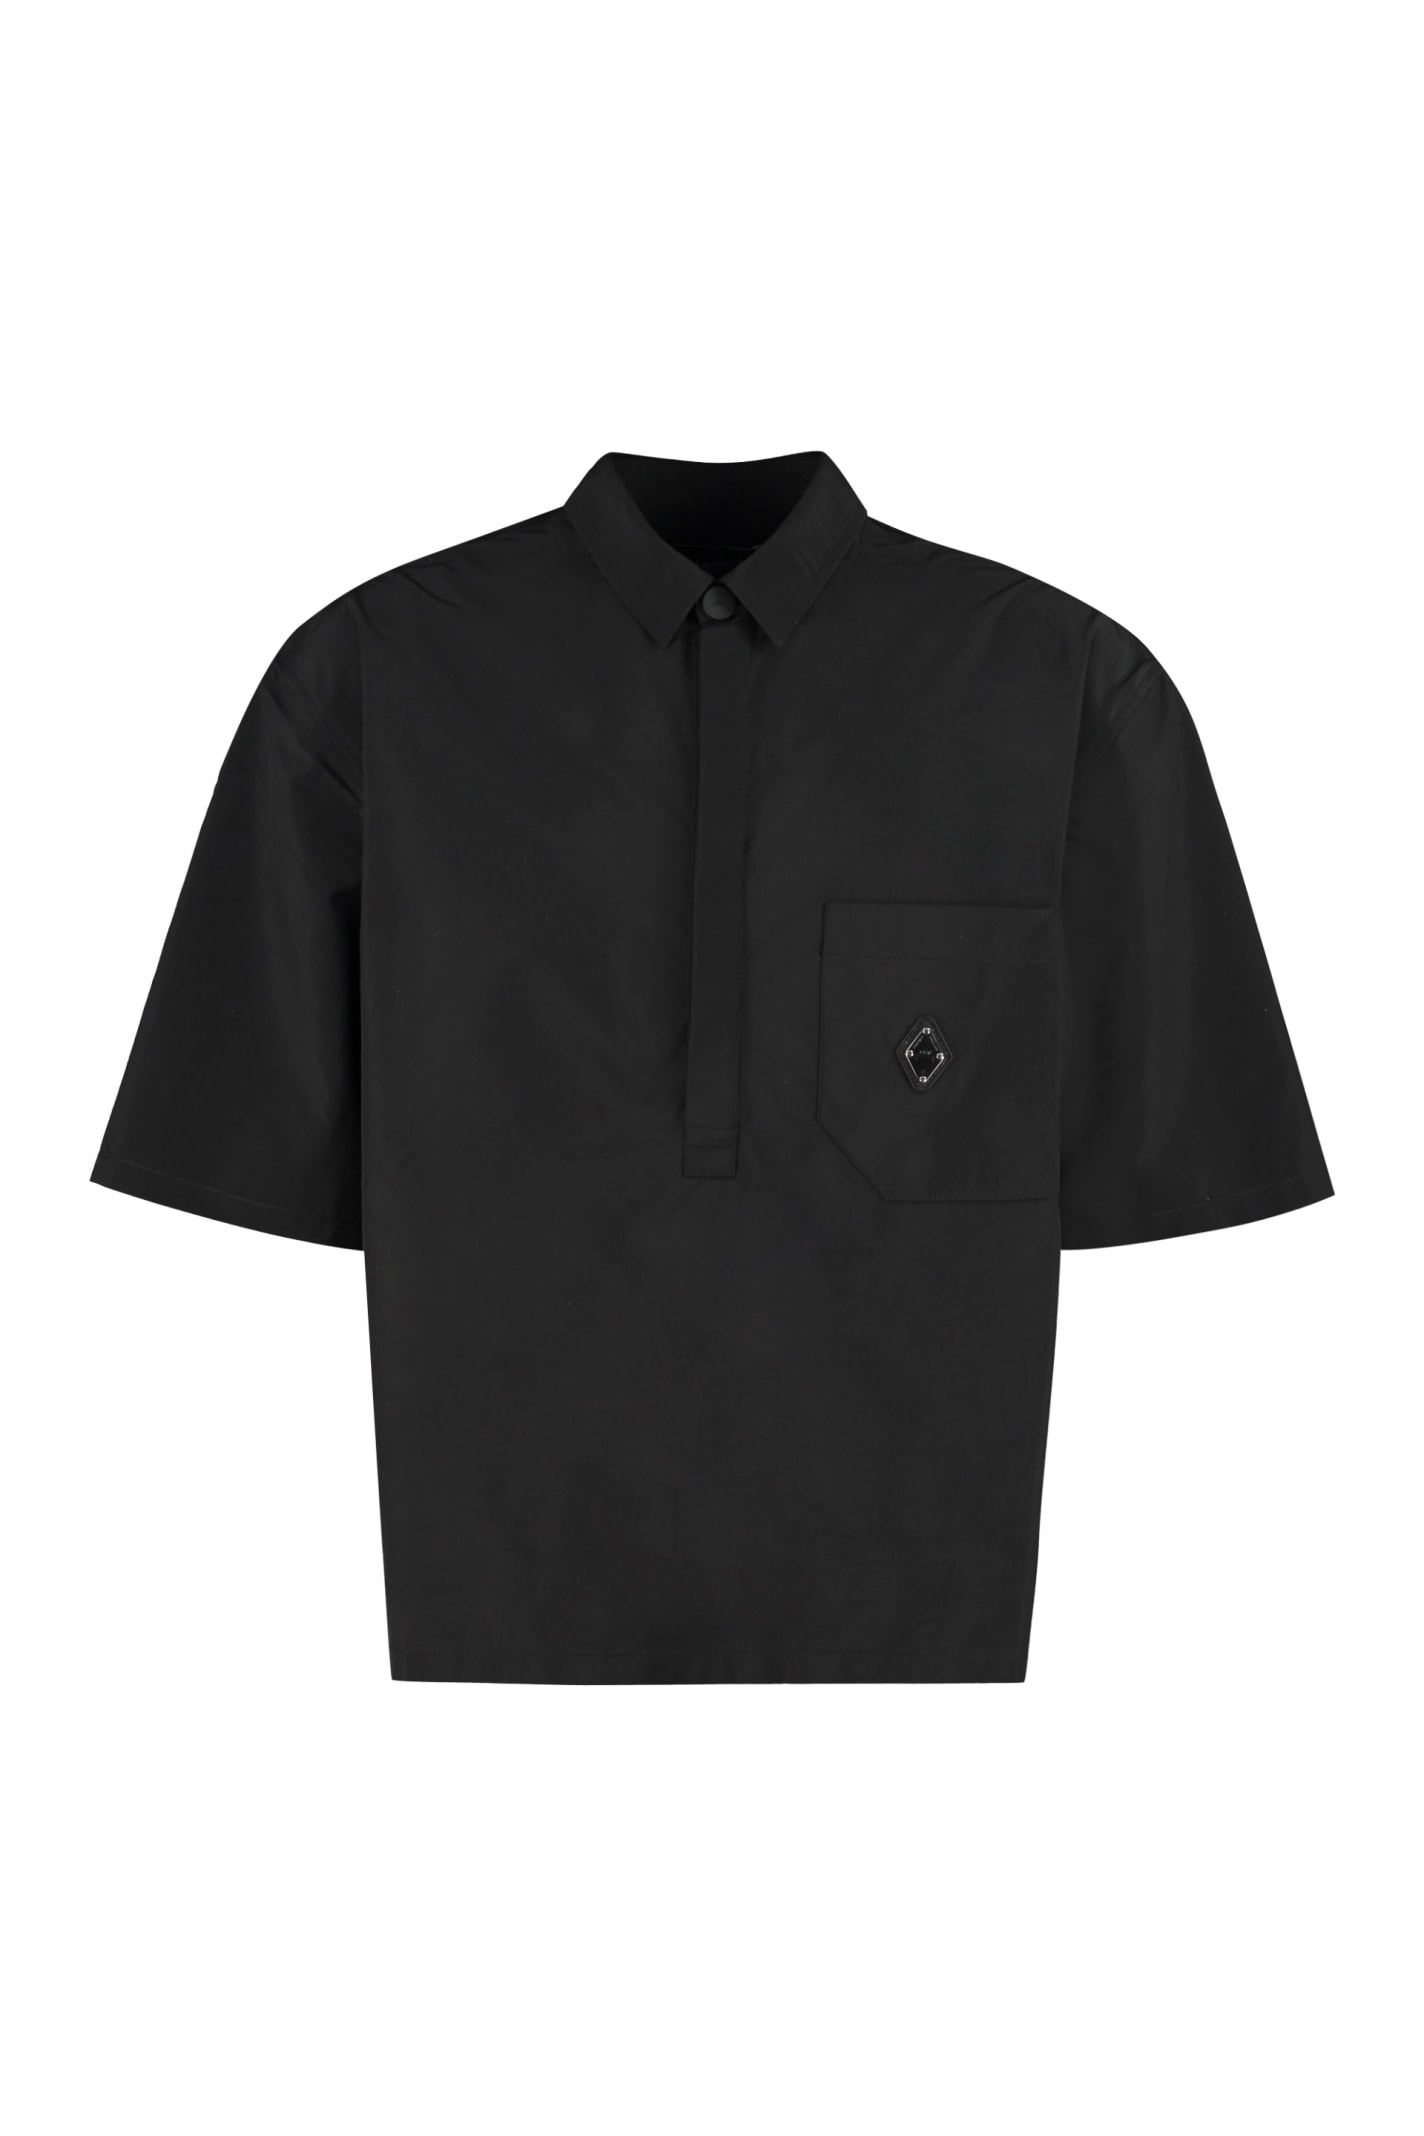 A-COLD-WALL Technical Fabric Shirt